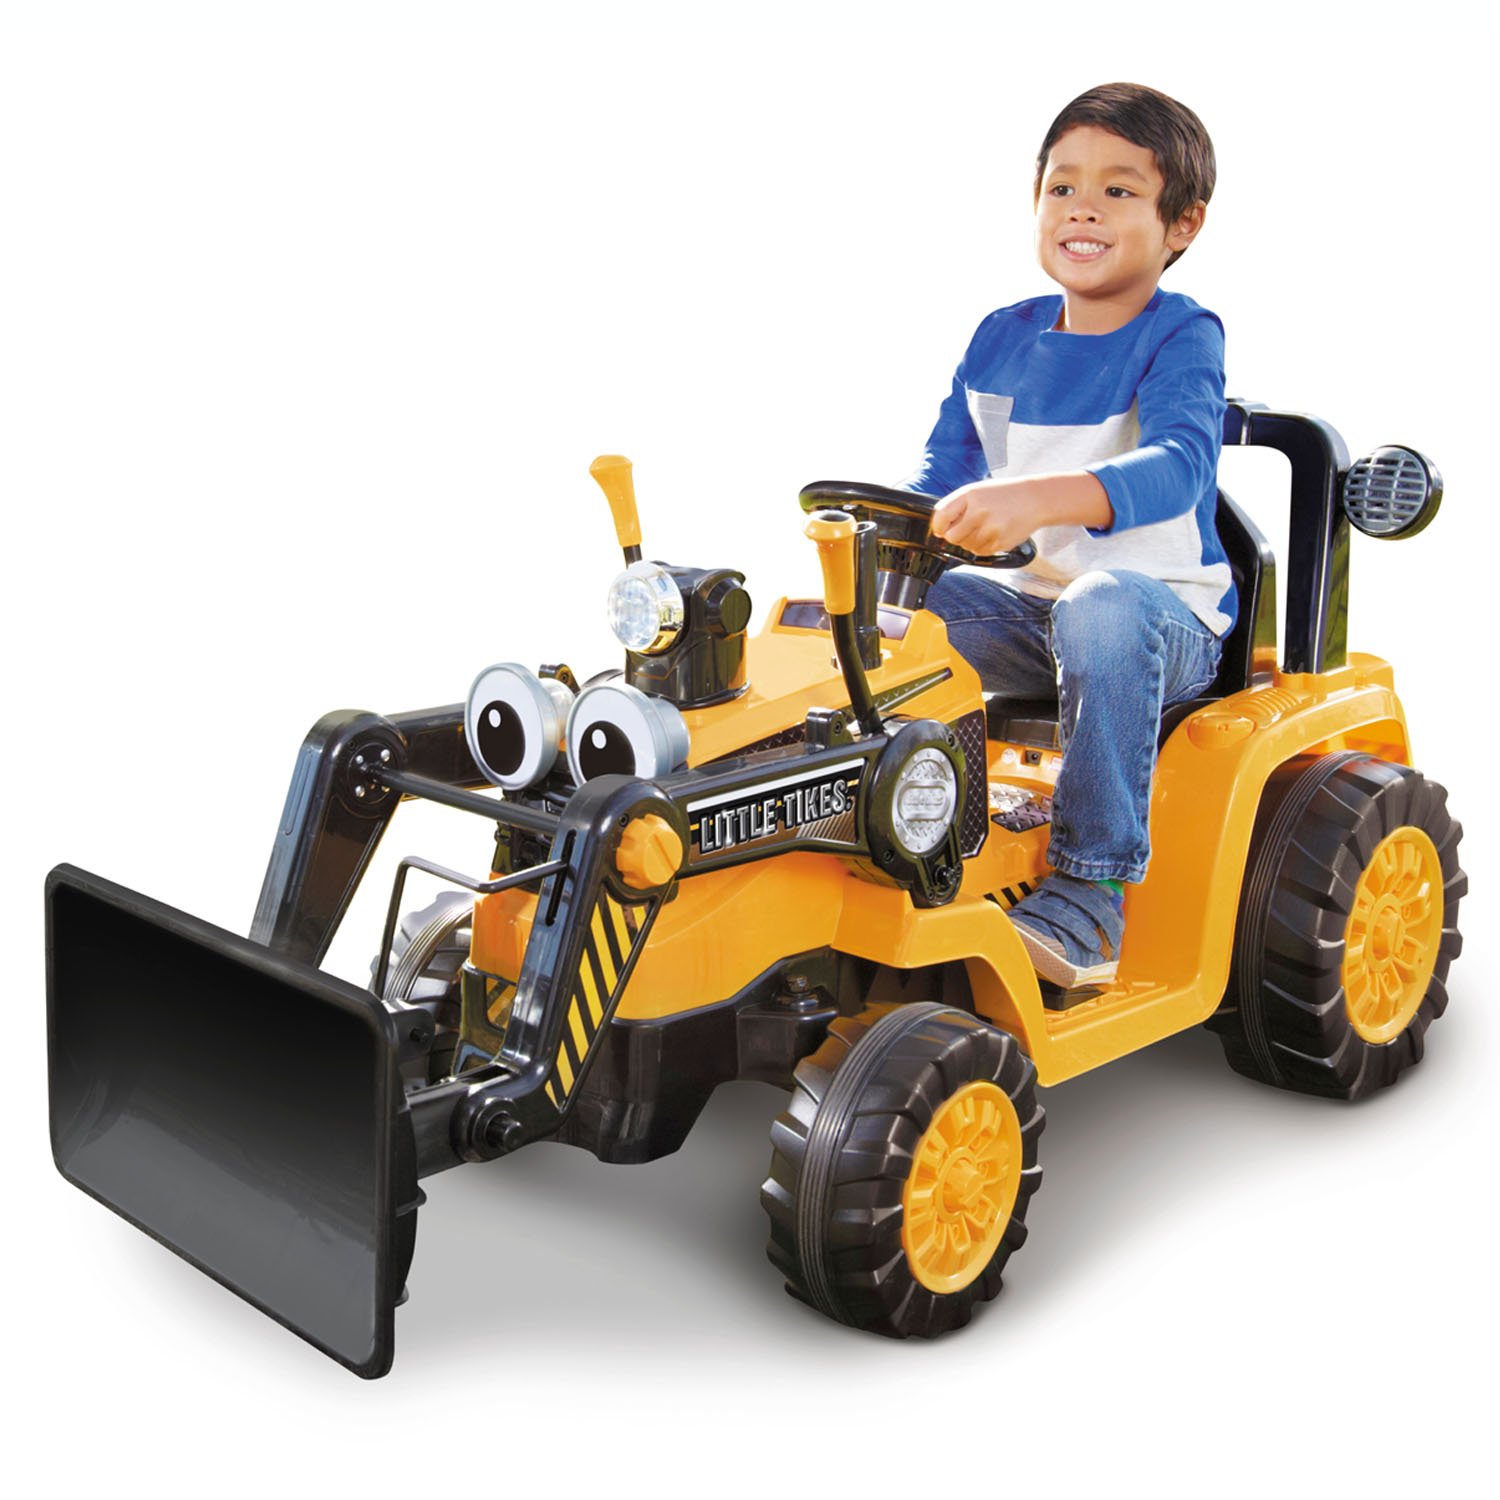 Cozy Dirt Digger 12V Battery Op Ride On | Little Tikes